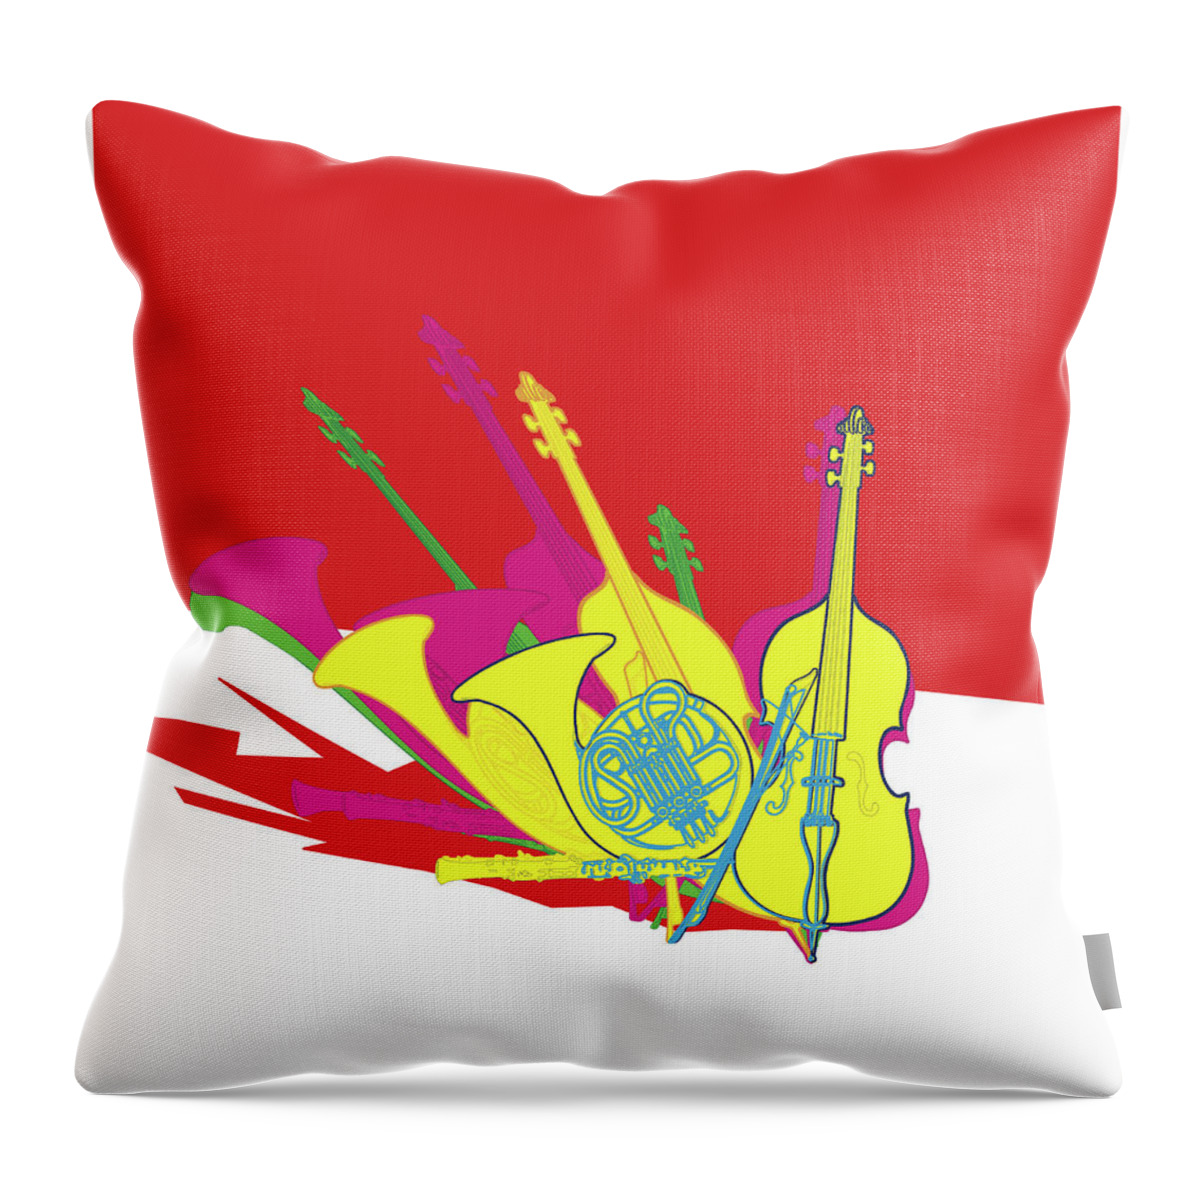  Throw Pillow featuring the digital art At The Beginning by Dax Esteves